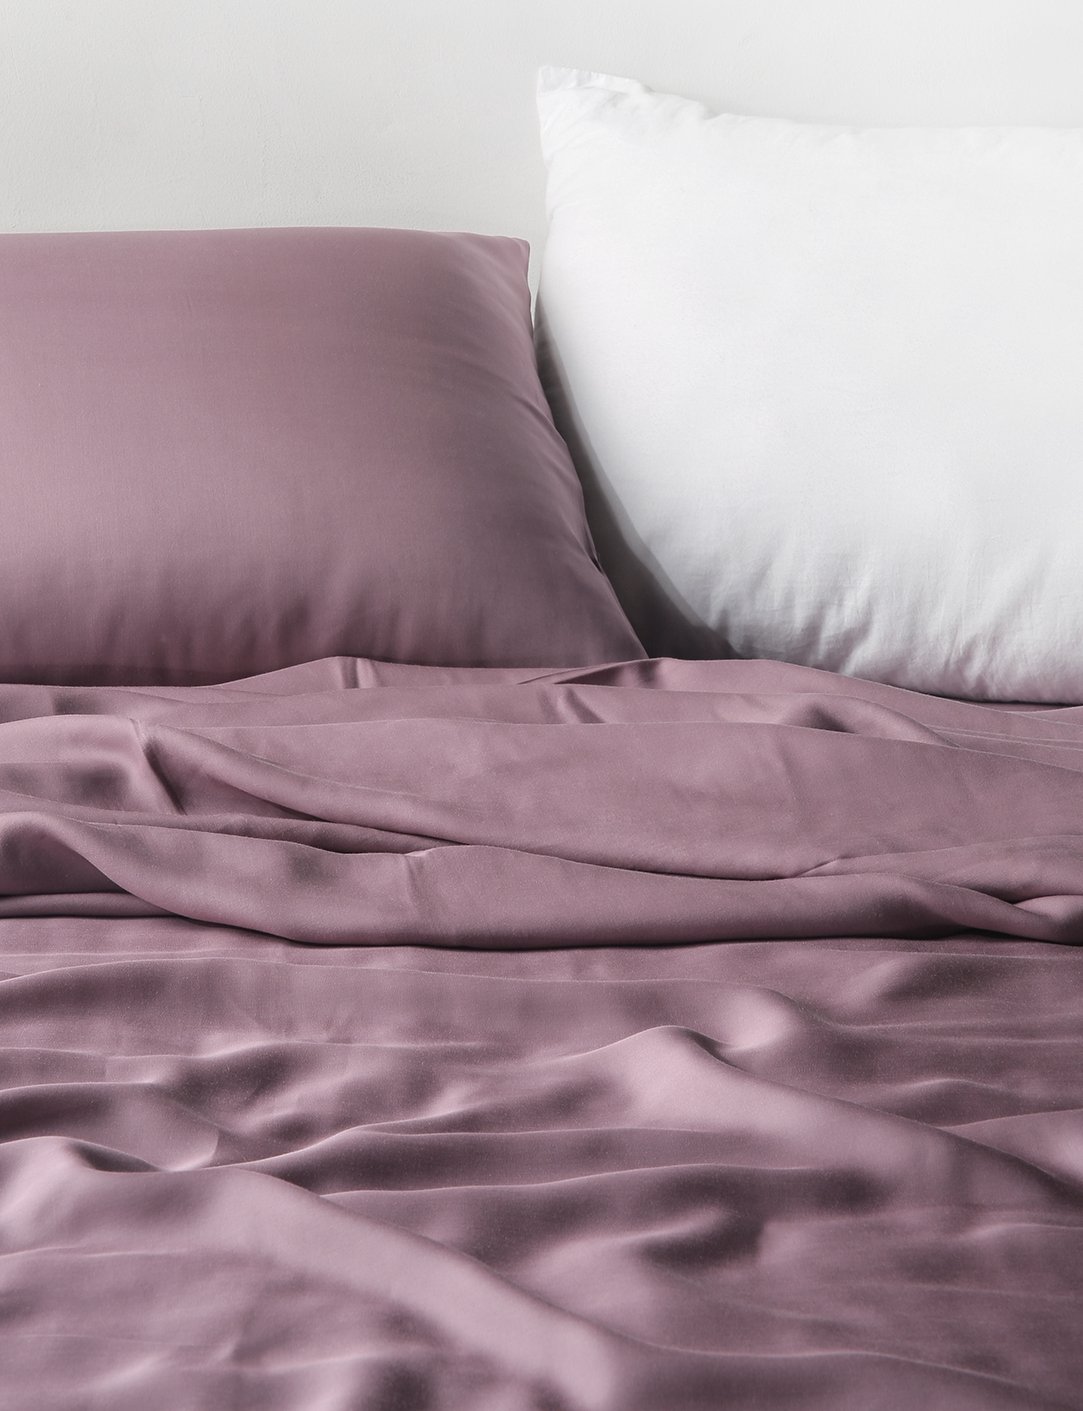 Solid Color Egyptian Cotton Luxury, Mauve Twin Bedding